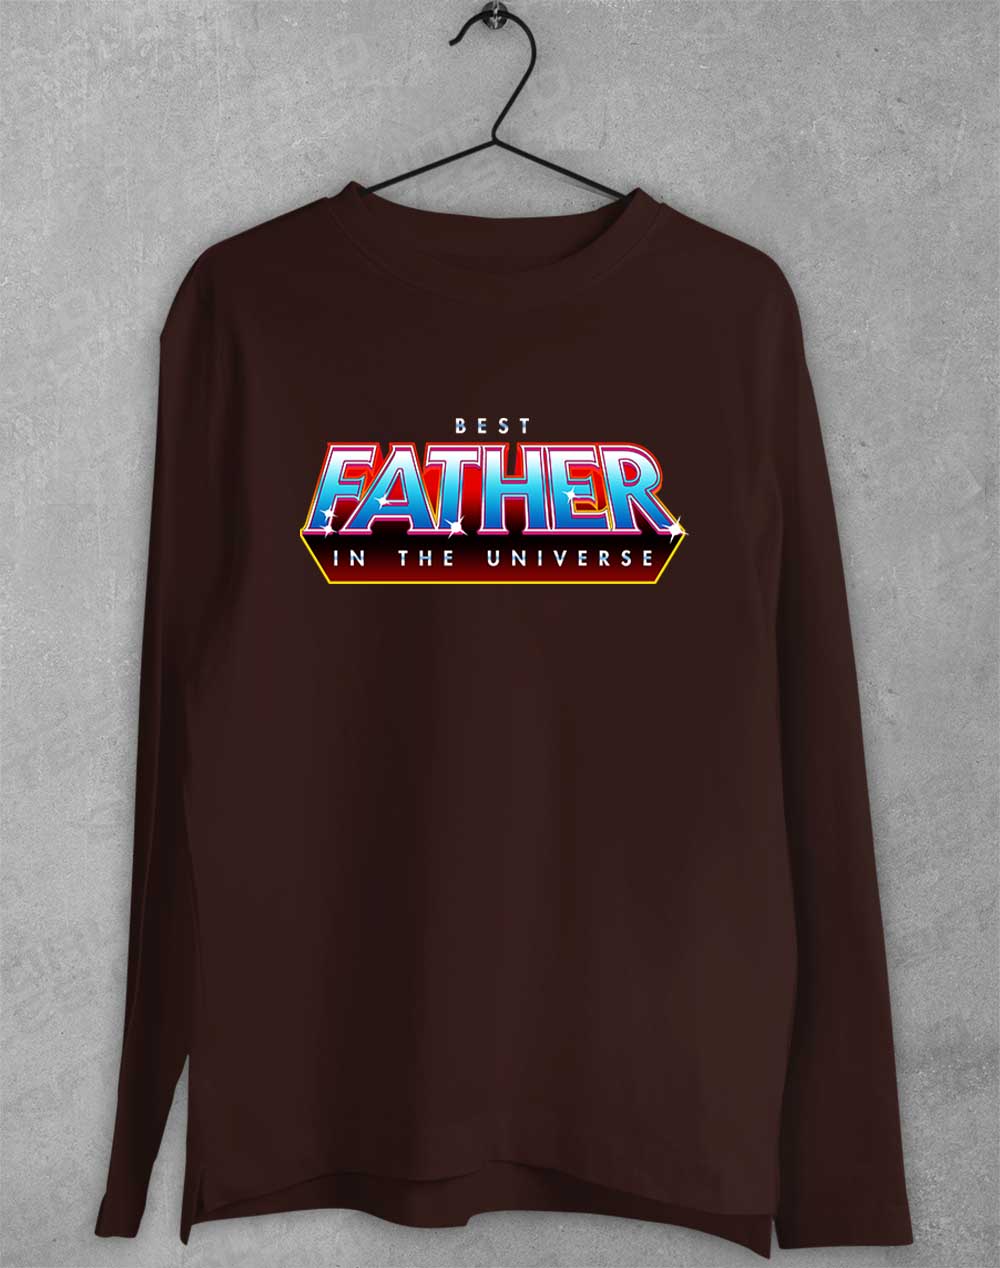 Dark Chocolate - Best Father in the Universe Long Sleeve T-Shirt